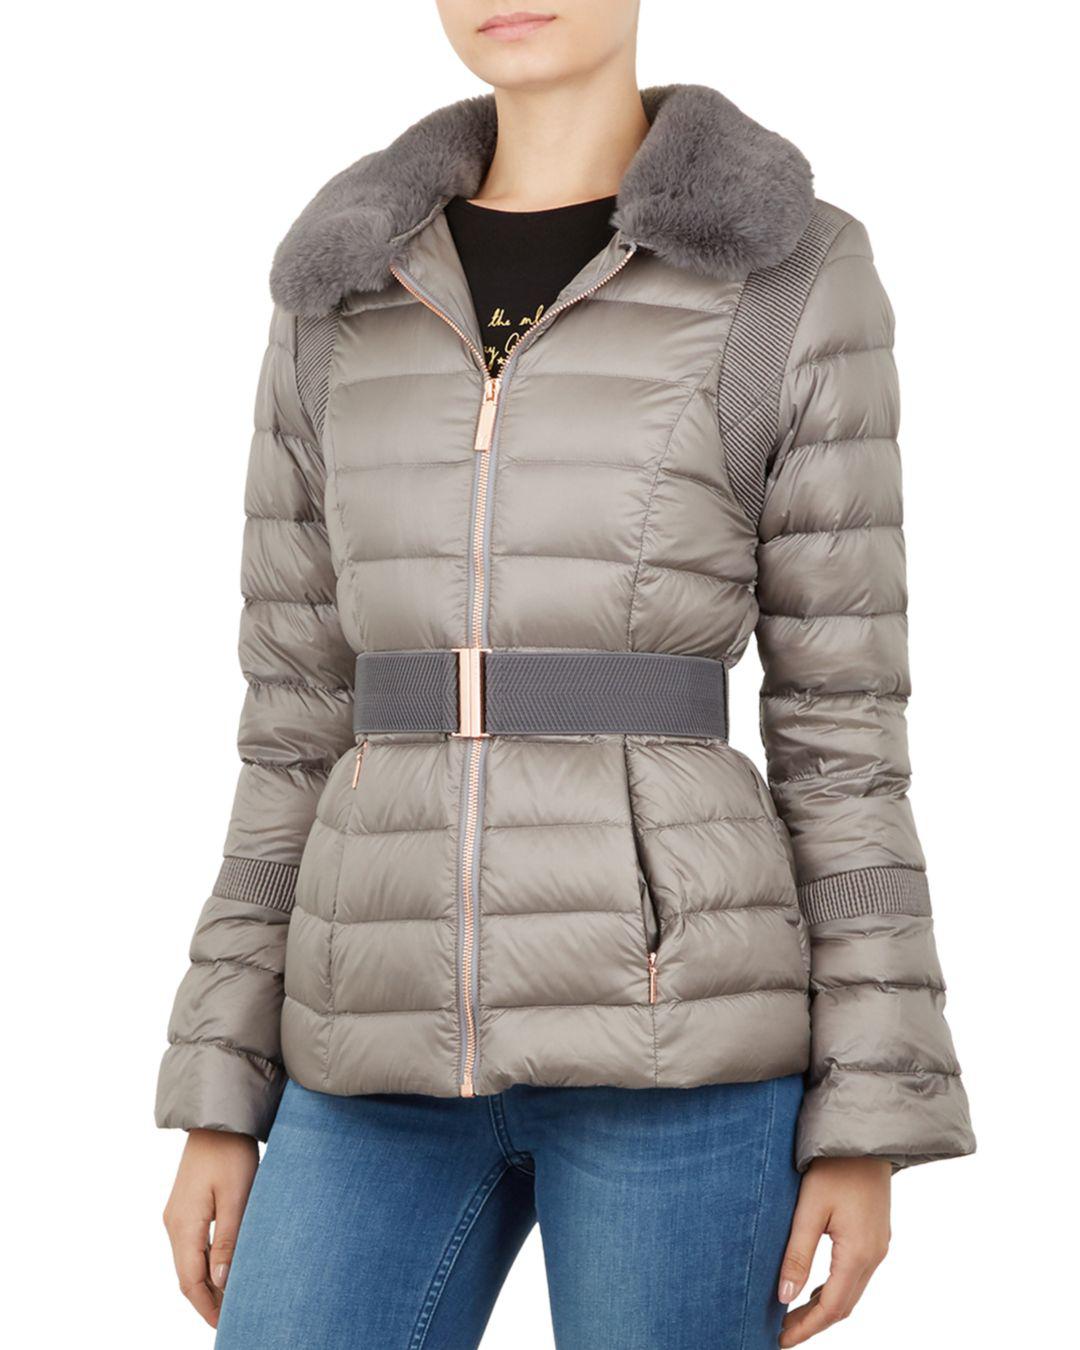 Ted Baker Yelta Quilted Down Jacket on Sale - playgrowned.com 1690790892